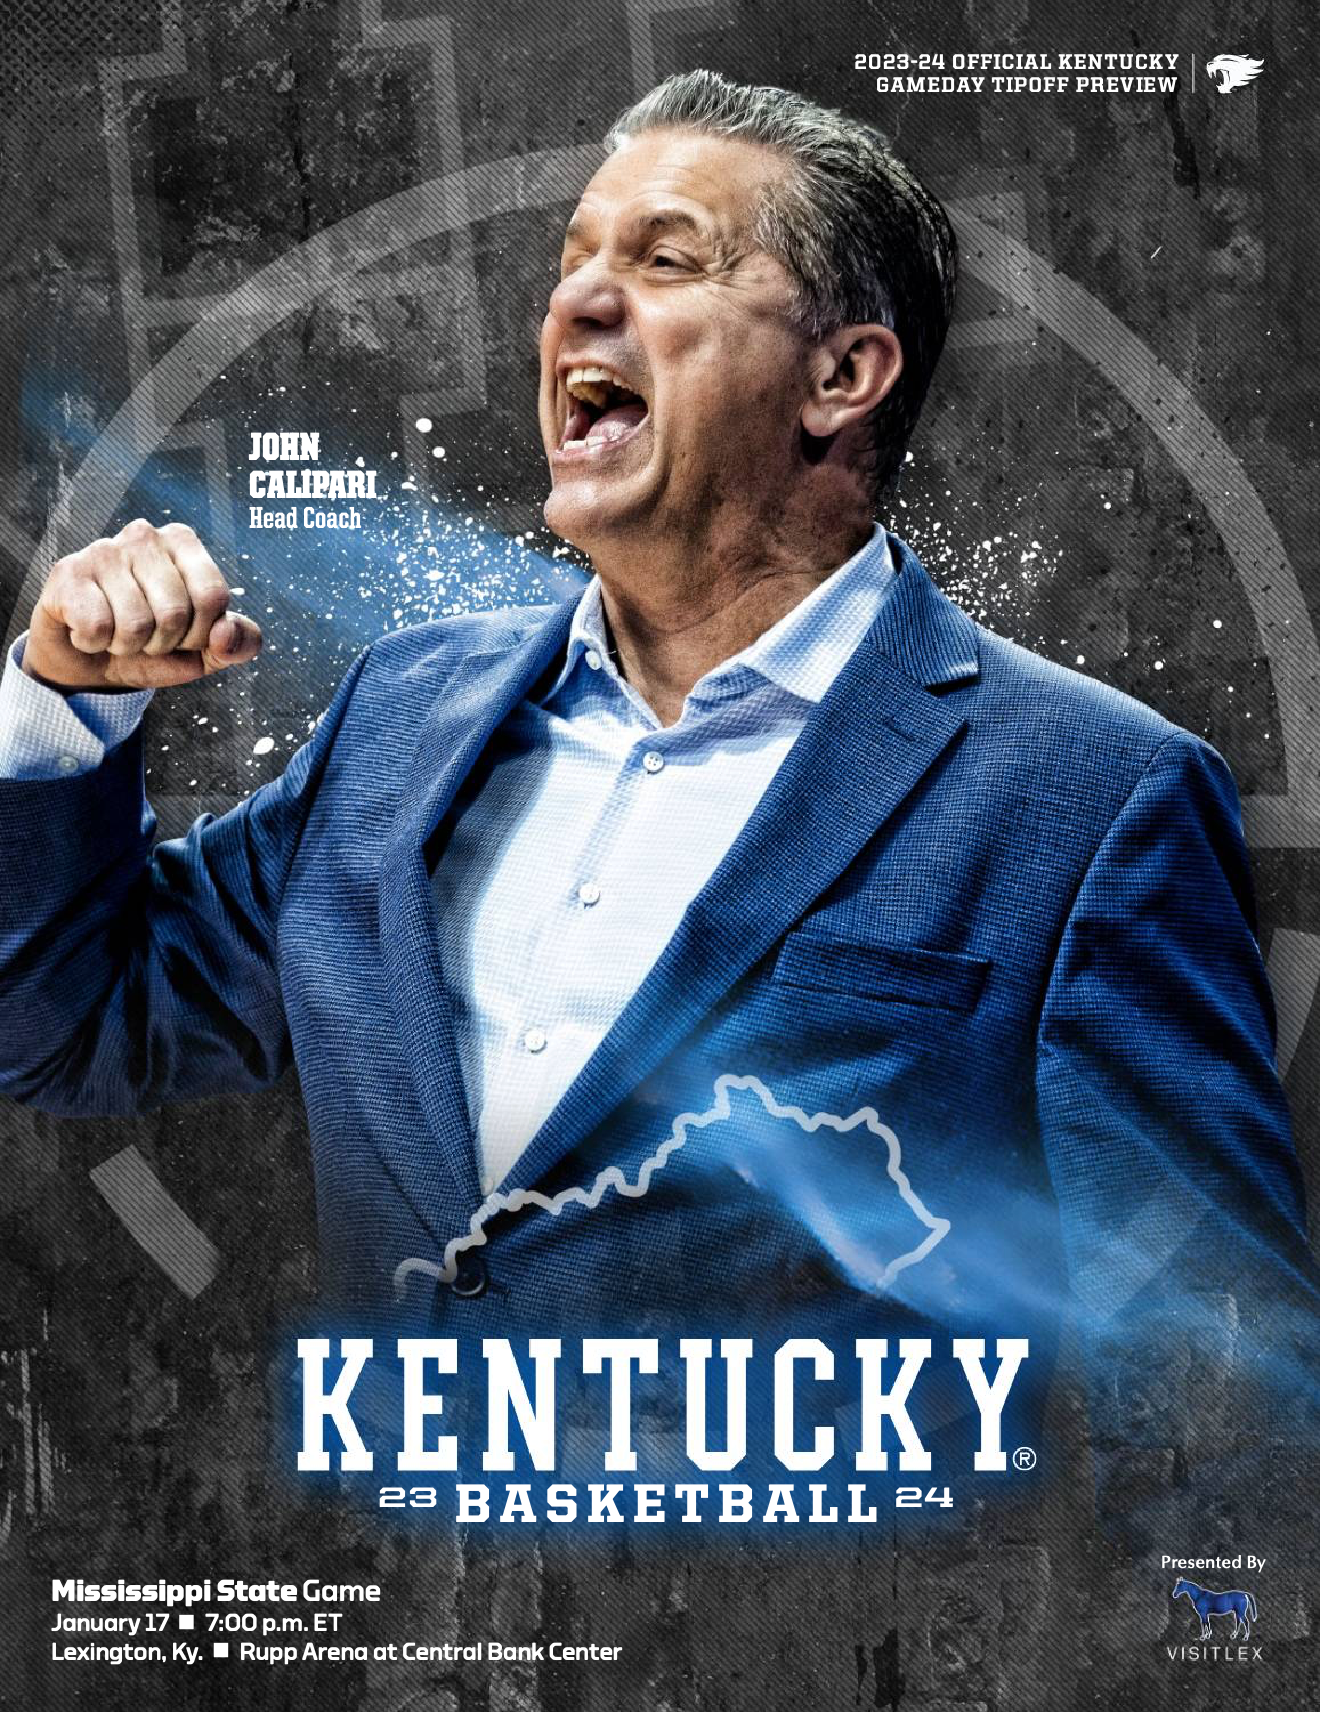 Listen and Watch UK Sports Network Radio Coverage of Kentucky Men's Basketball vs Mississippi State